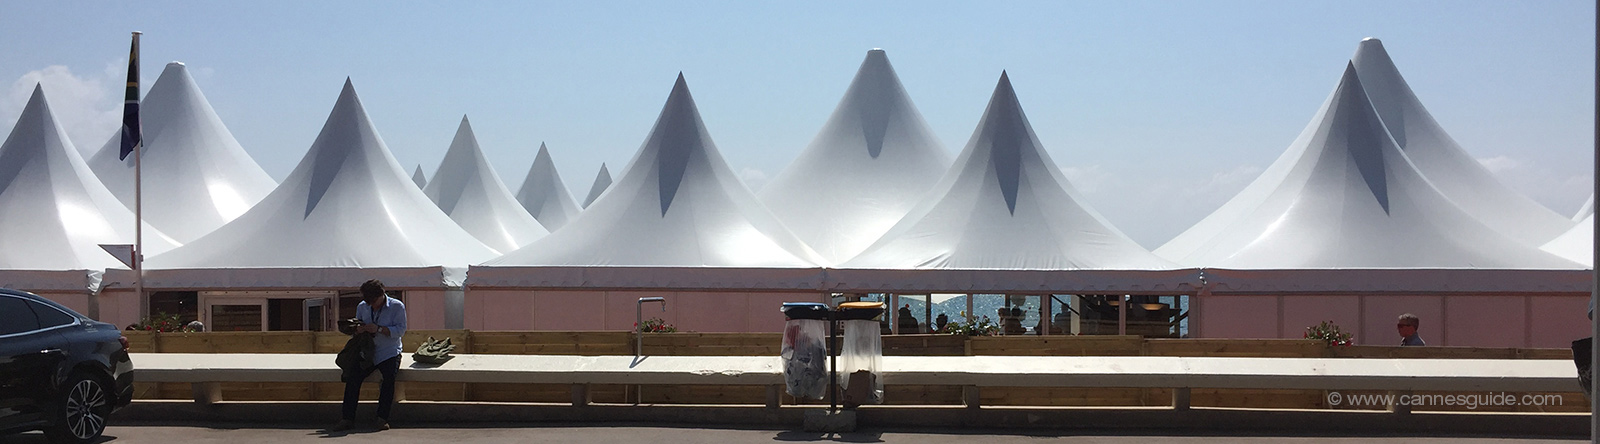 Pavilions in Cannes